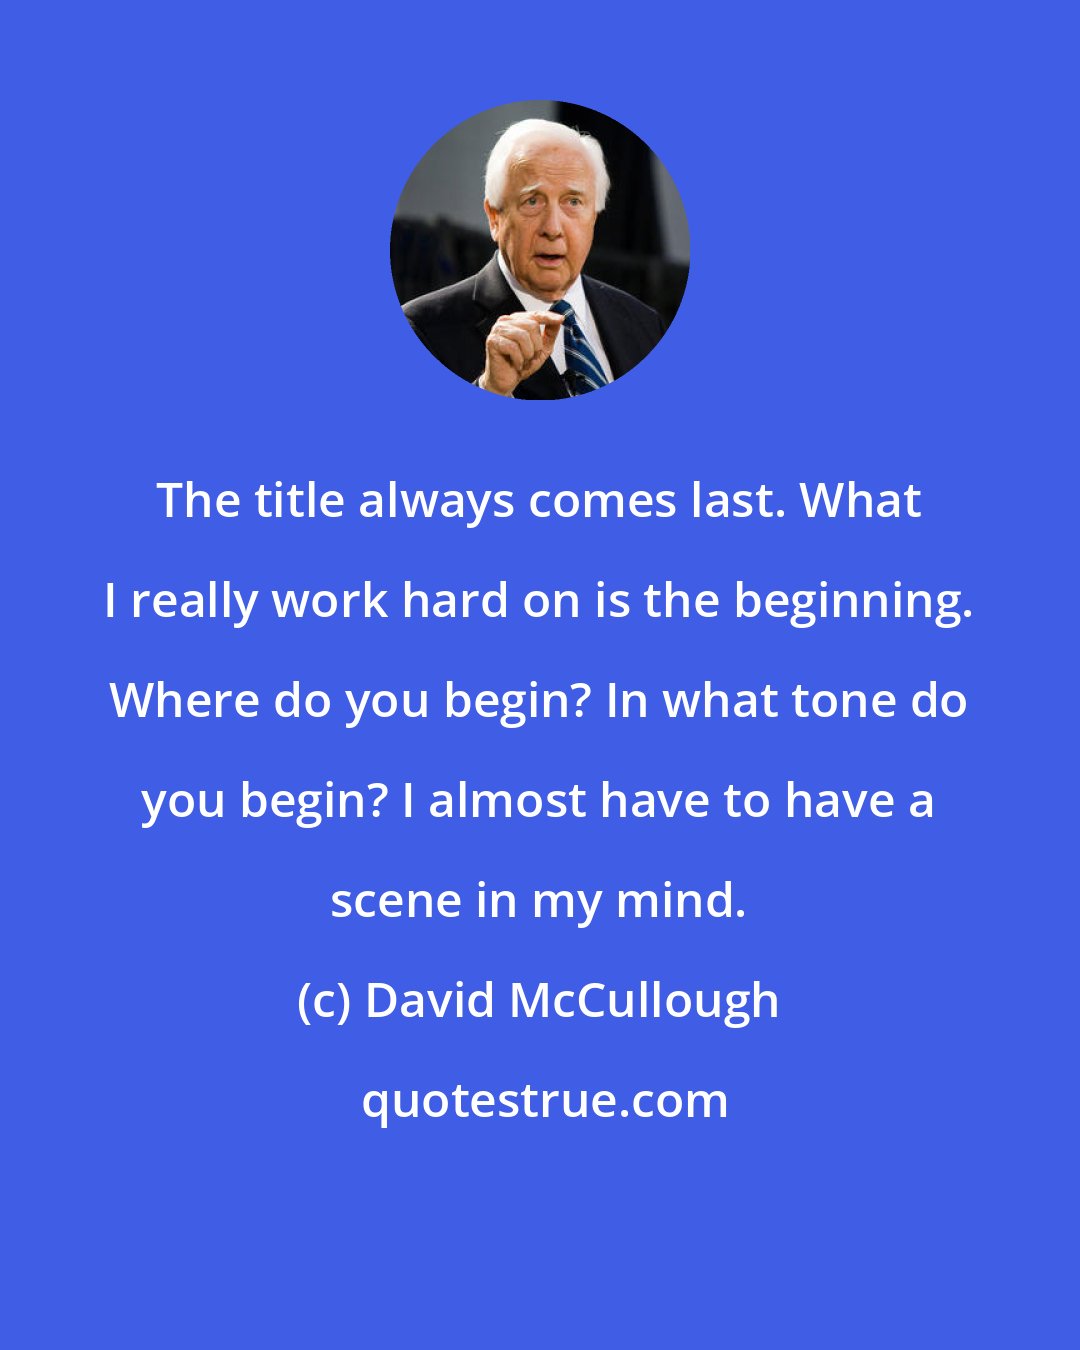 David McCullough: The title always comes last. What I really work hard on is the beginning. Where do you begin? In what tone do you begin? I almost have to have a scene in my mind.